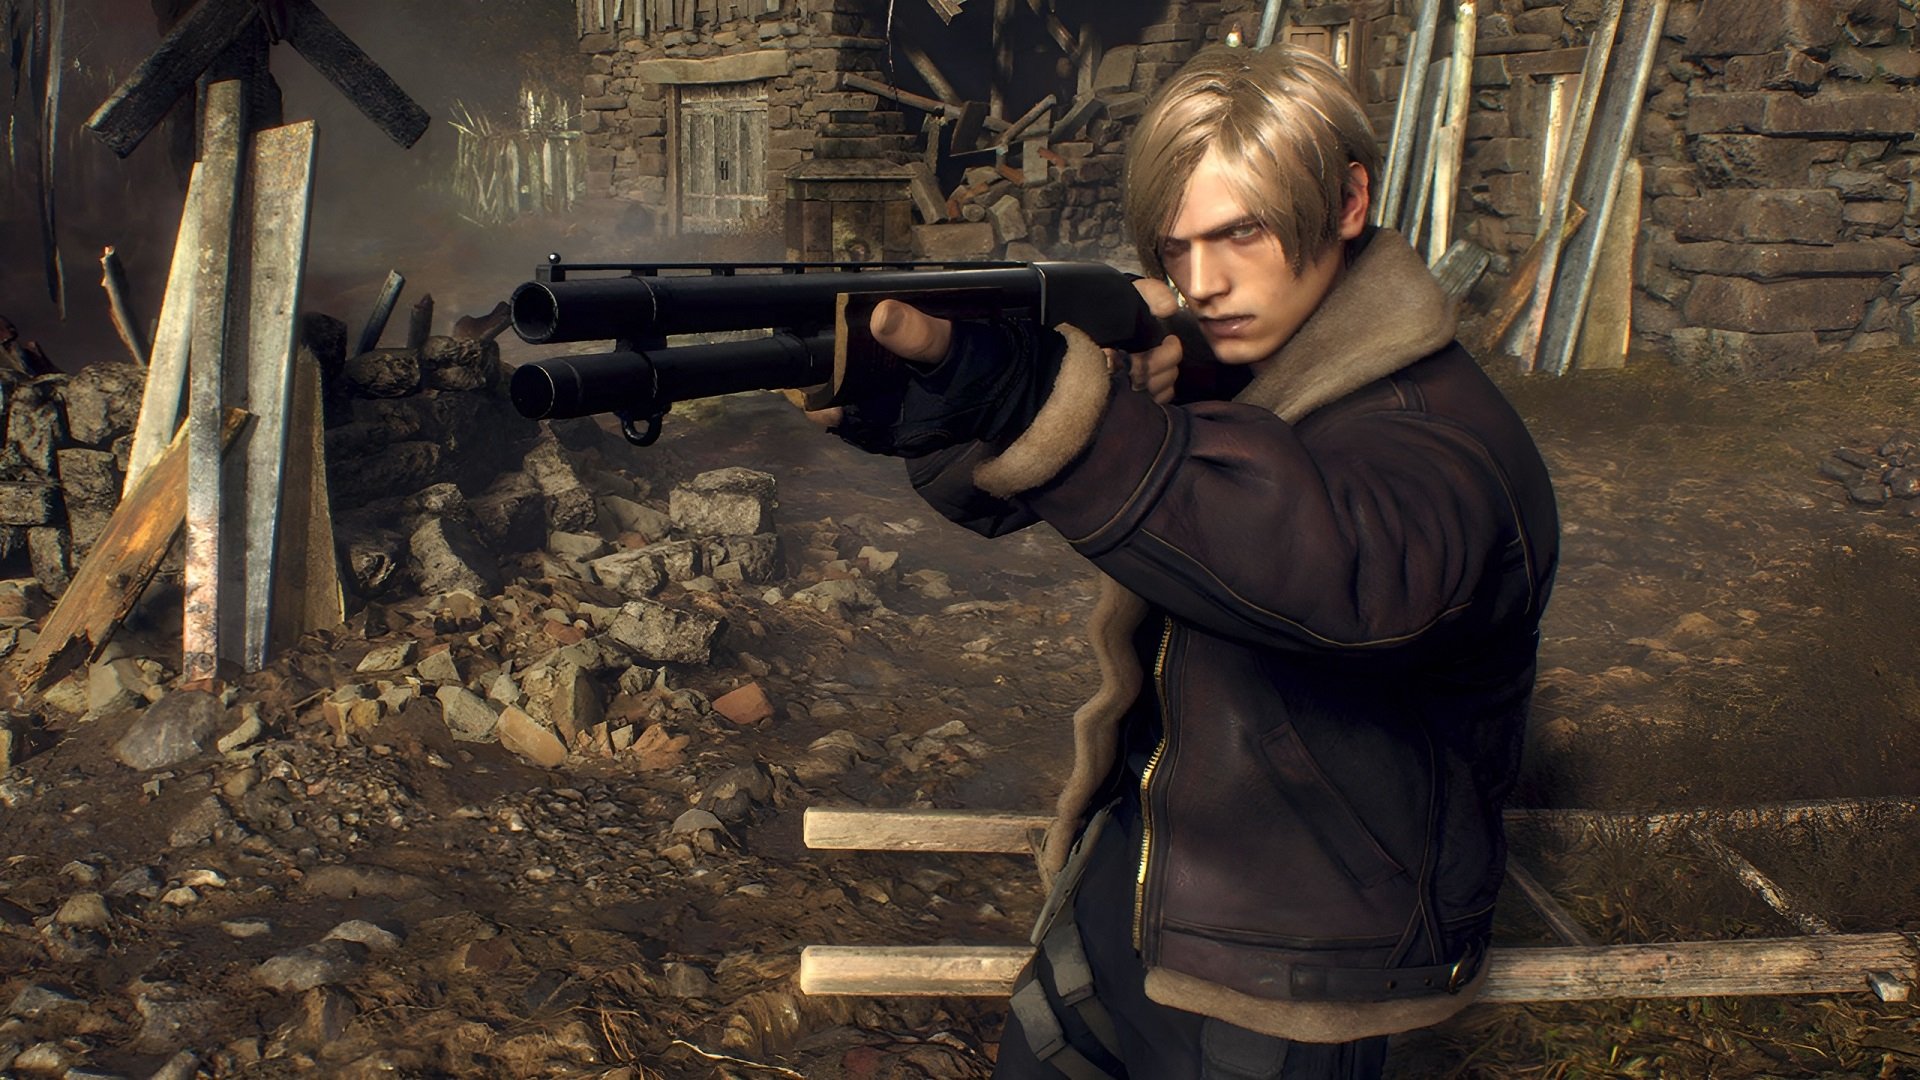 Resident Evil 4 on PC: What Do The Players Think?